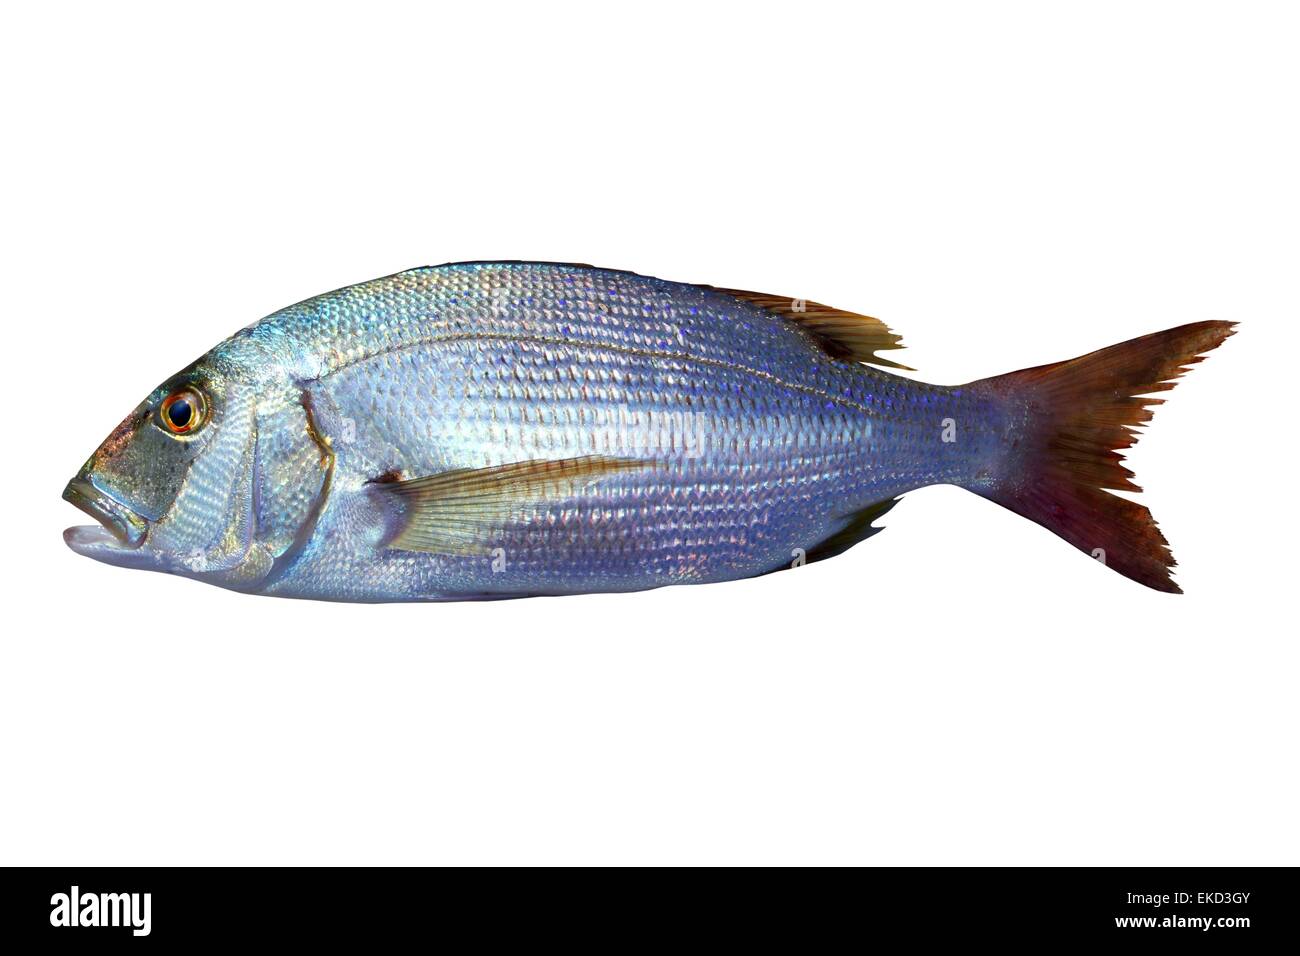 Dentex vulgaris toothed sparus snapper fish Stock Photo